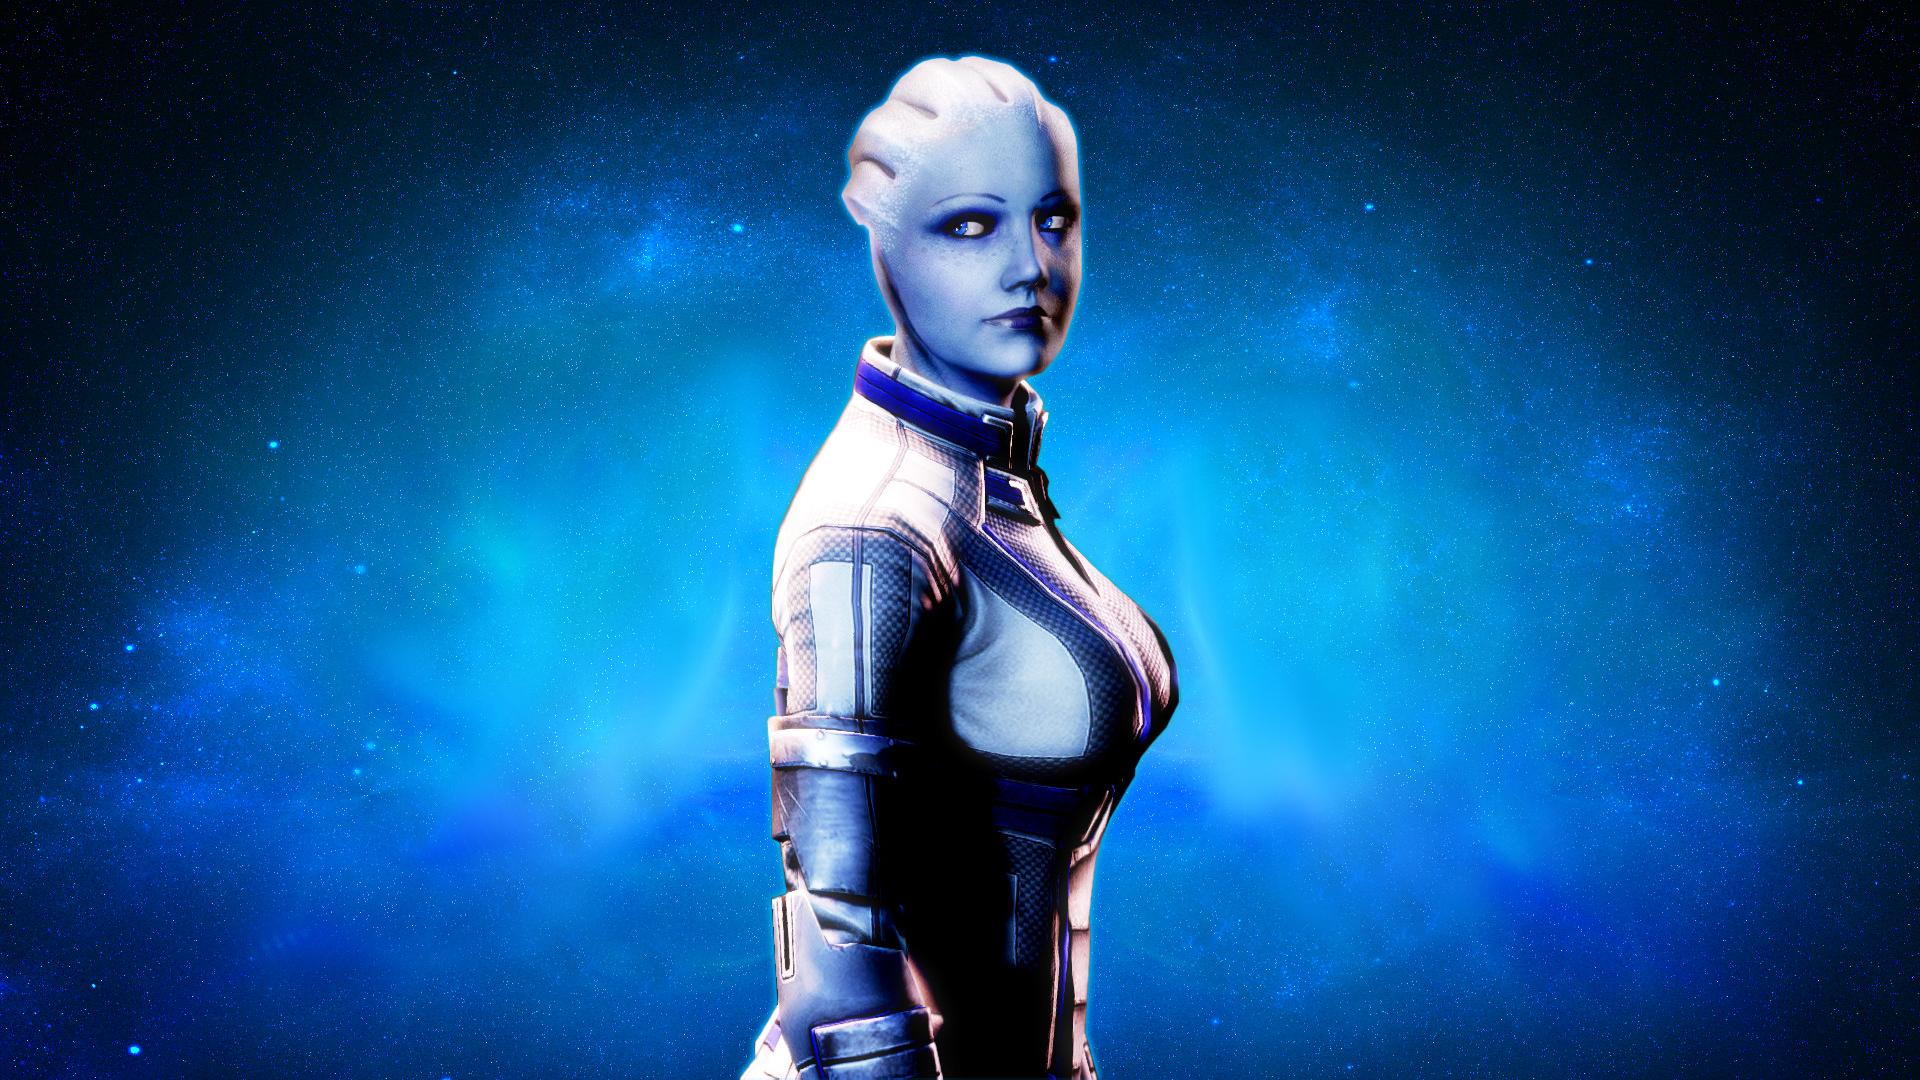 Wanted to share this amazing Liara wallpaper (didn't see this around here i think, sorry if it's a repost)